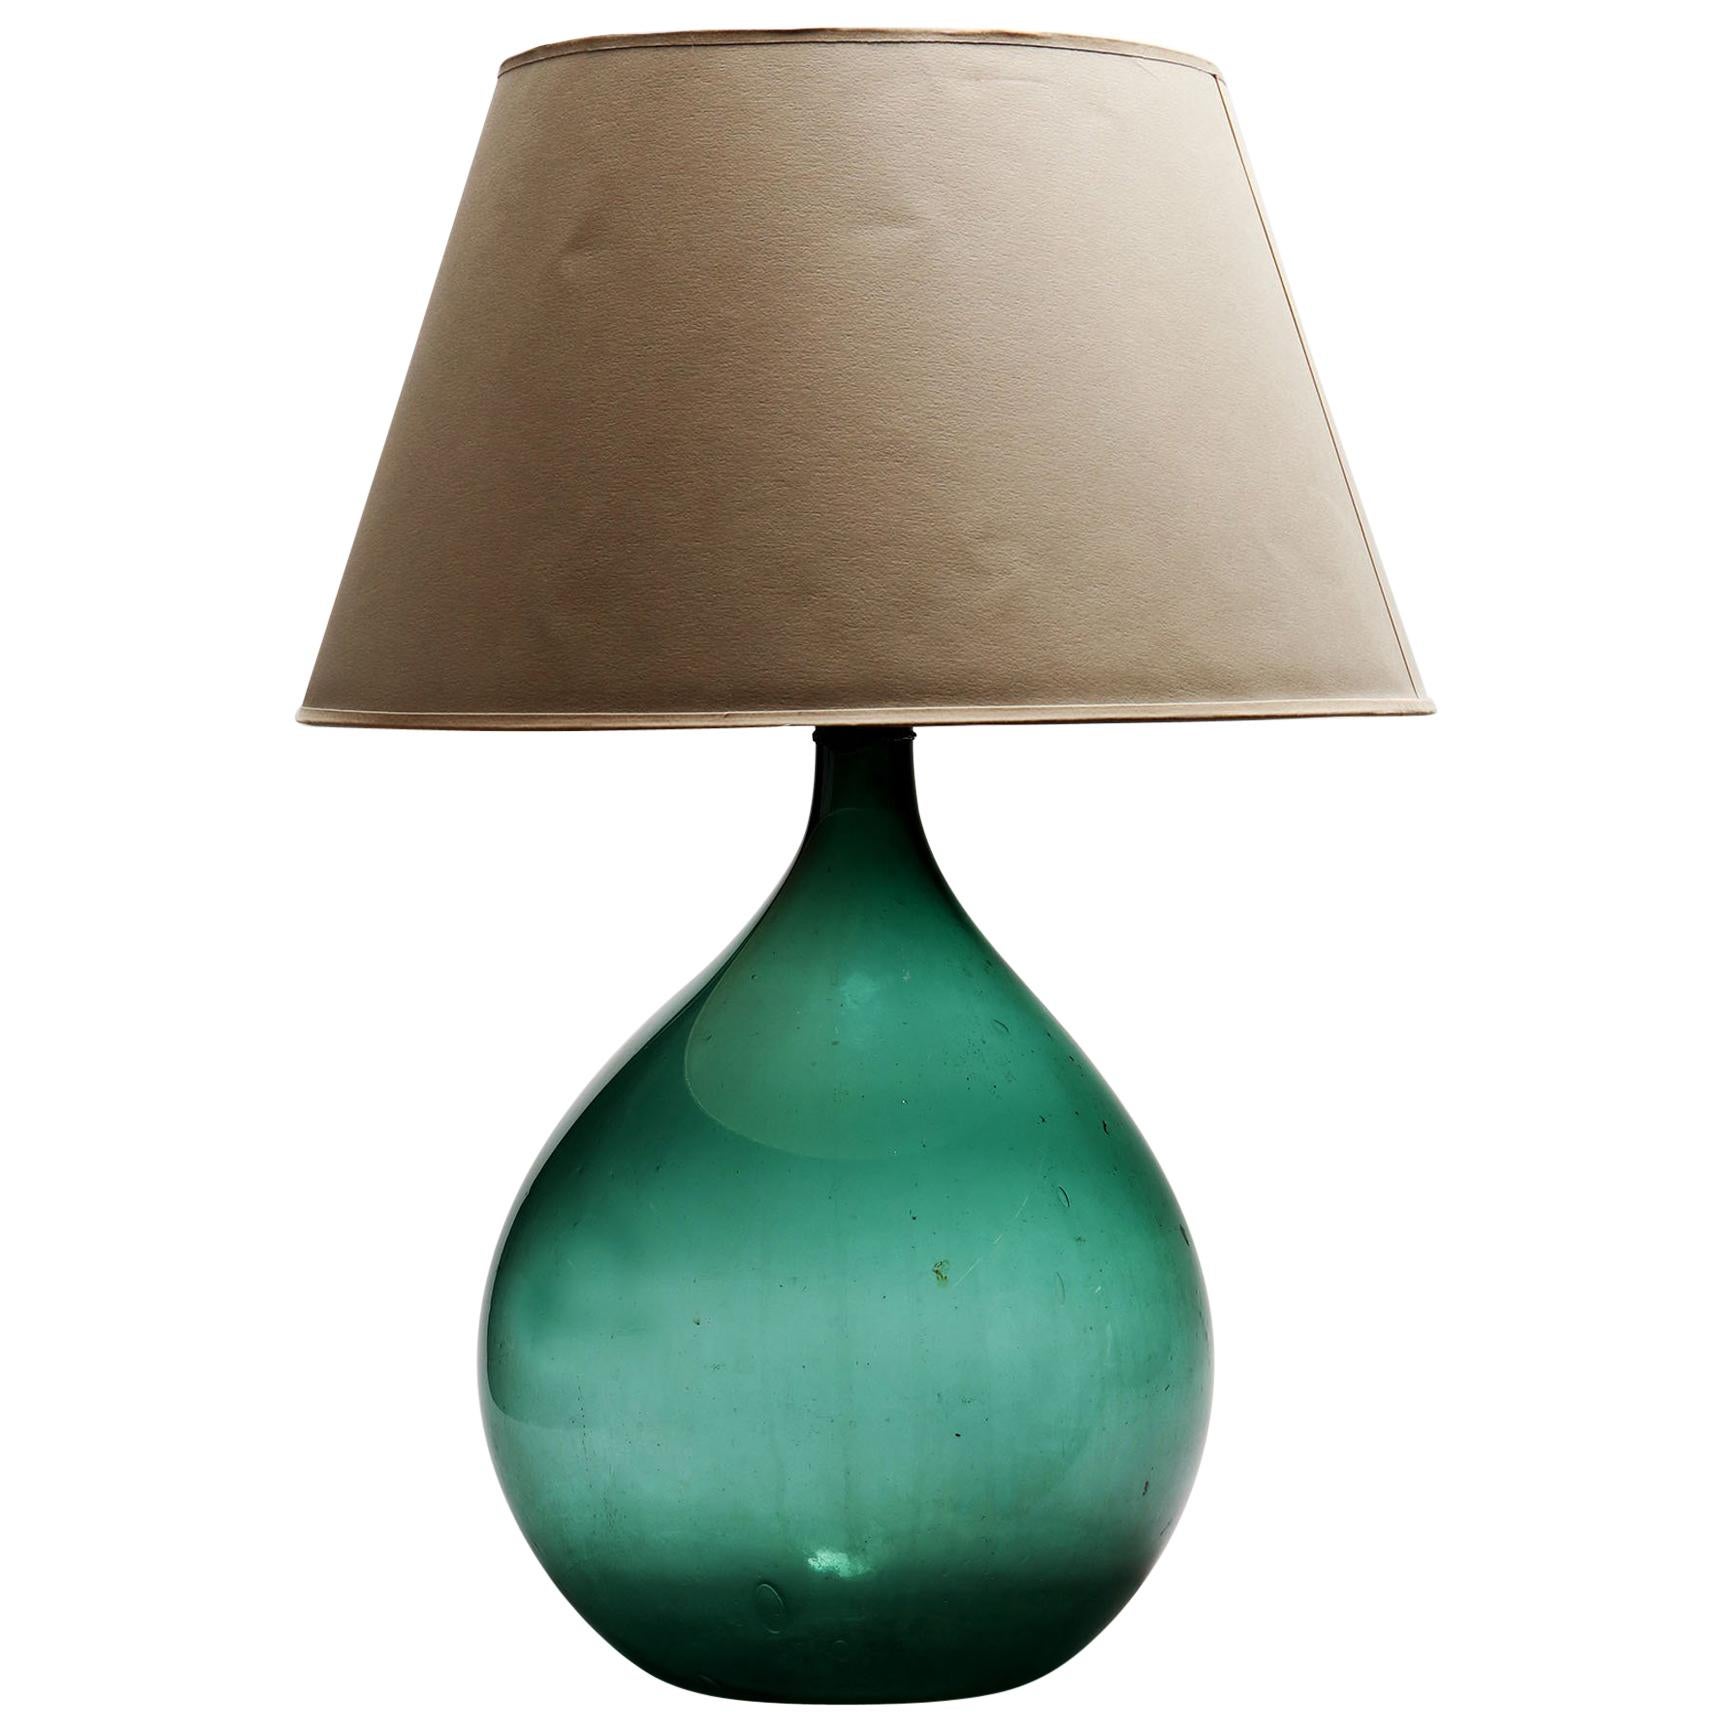 Very Large 19th Century Green Glass Vessel as a Table Lamp